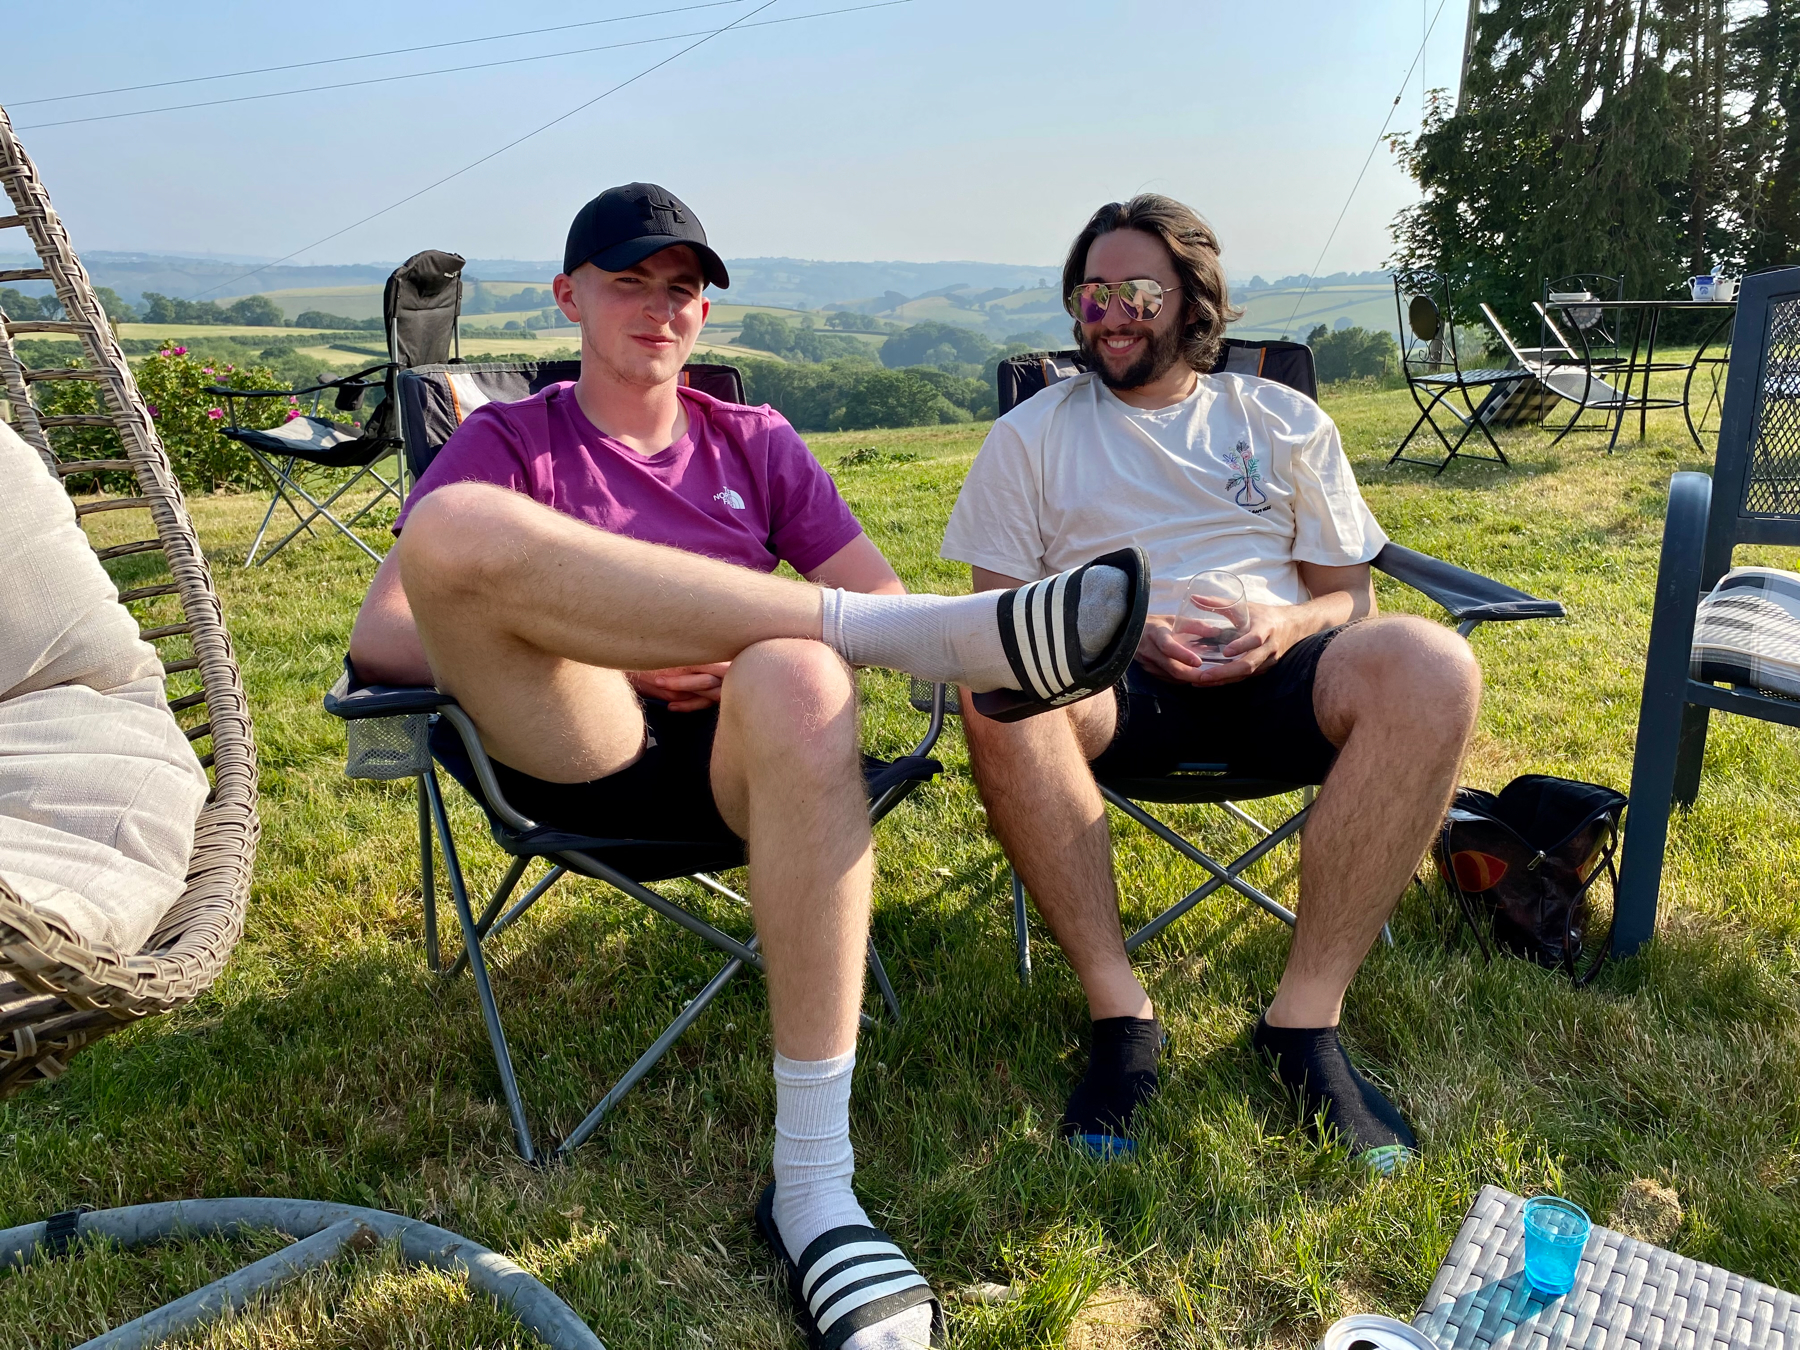 Two young men on camping chairs, fields in background